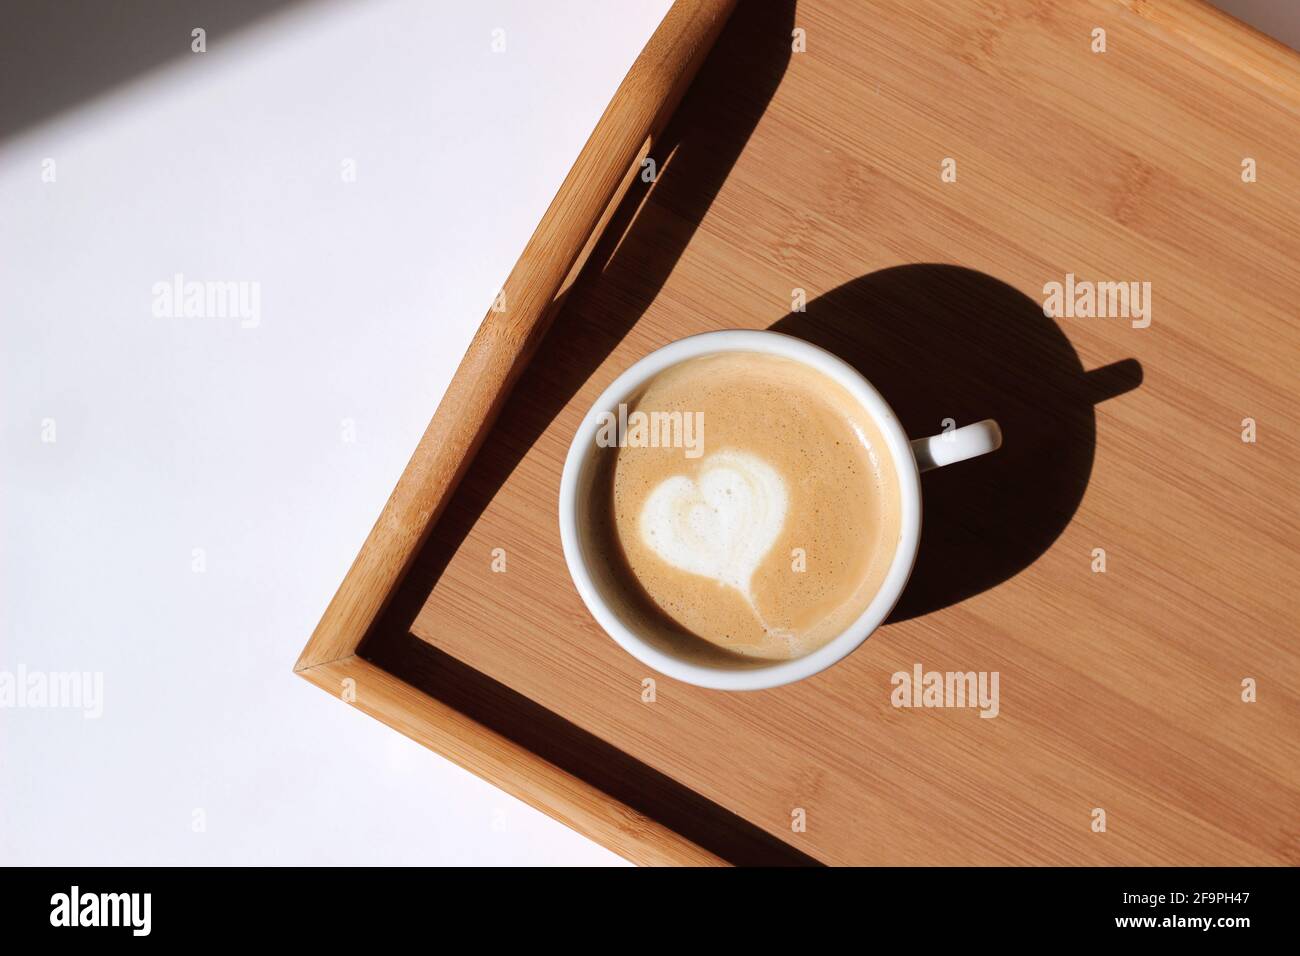 Cappuccino with Latte Art Served on Wooden Tray. Drinking Morning Coffee at Home. Stock Photo